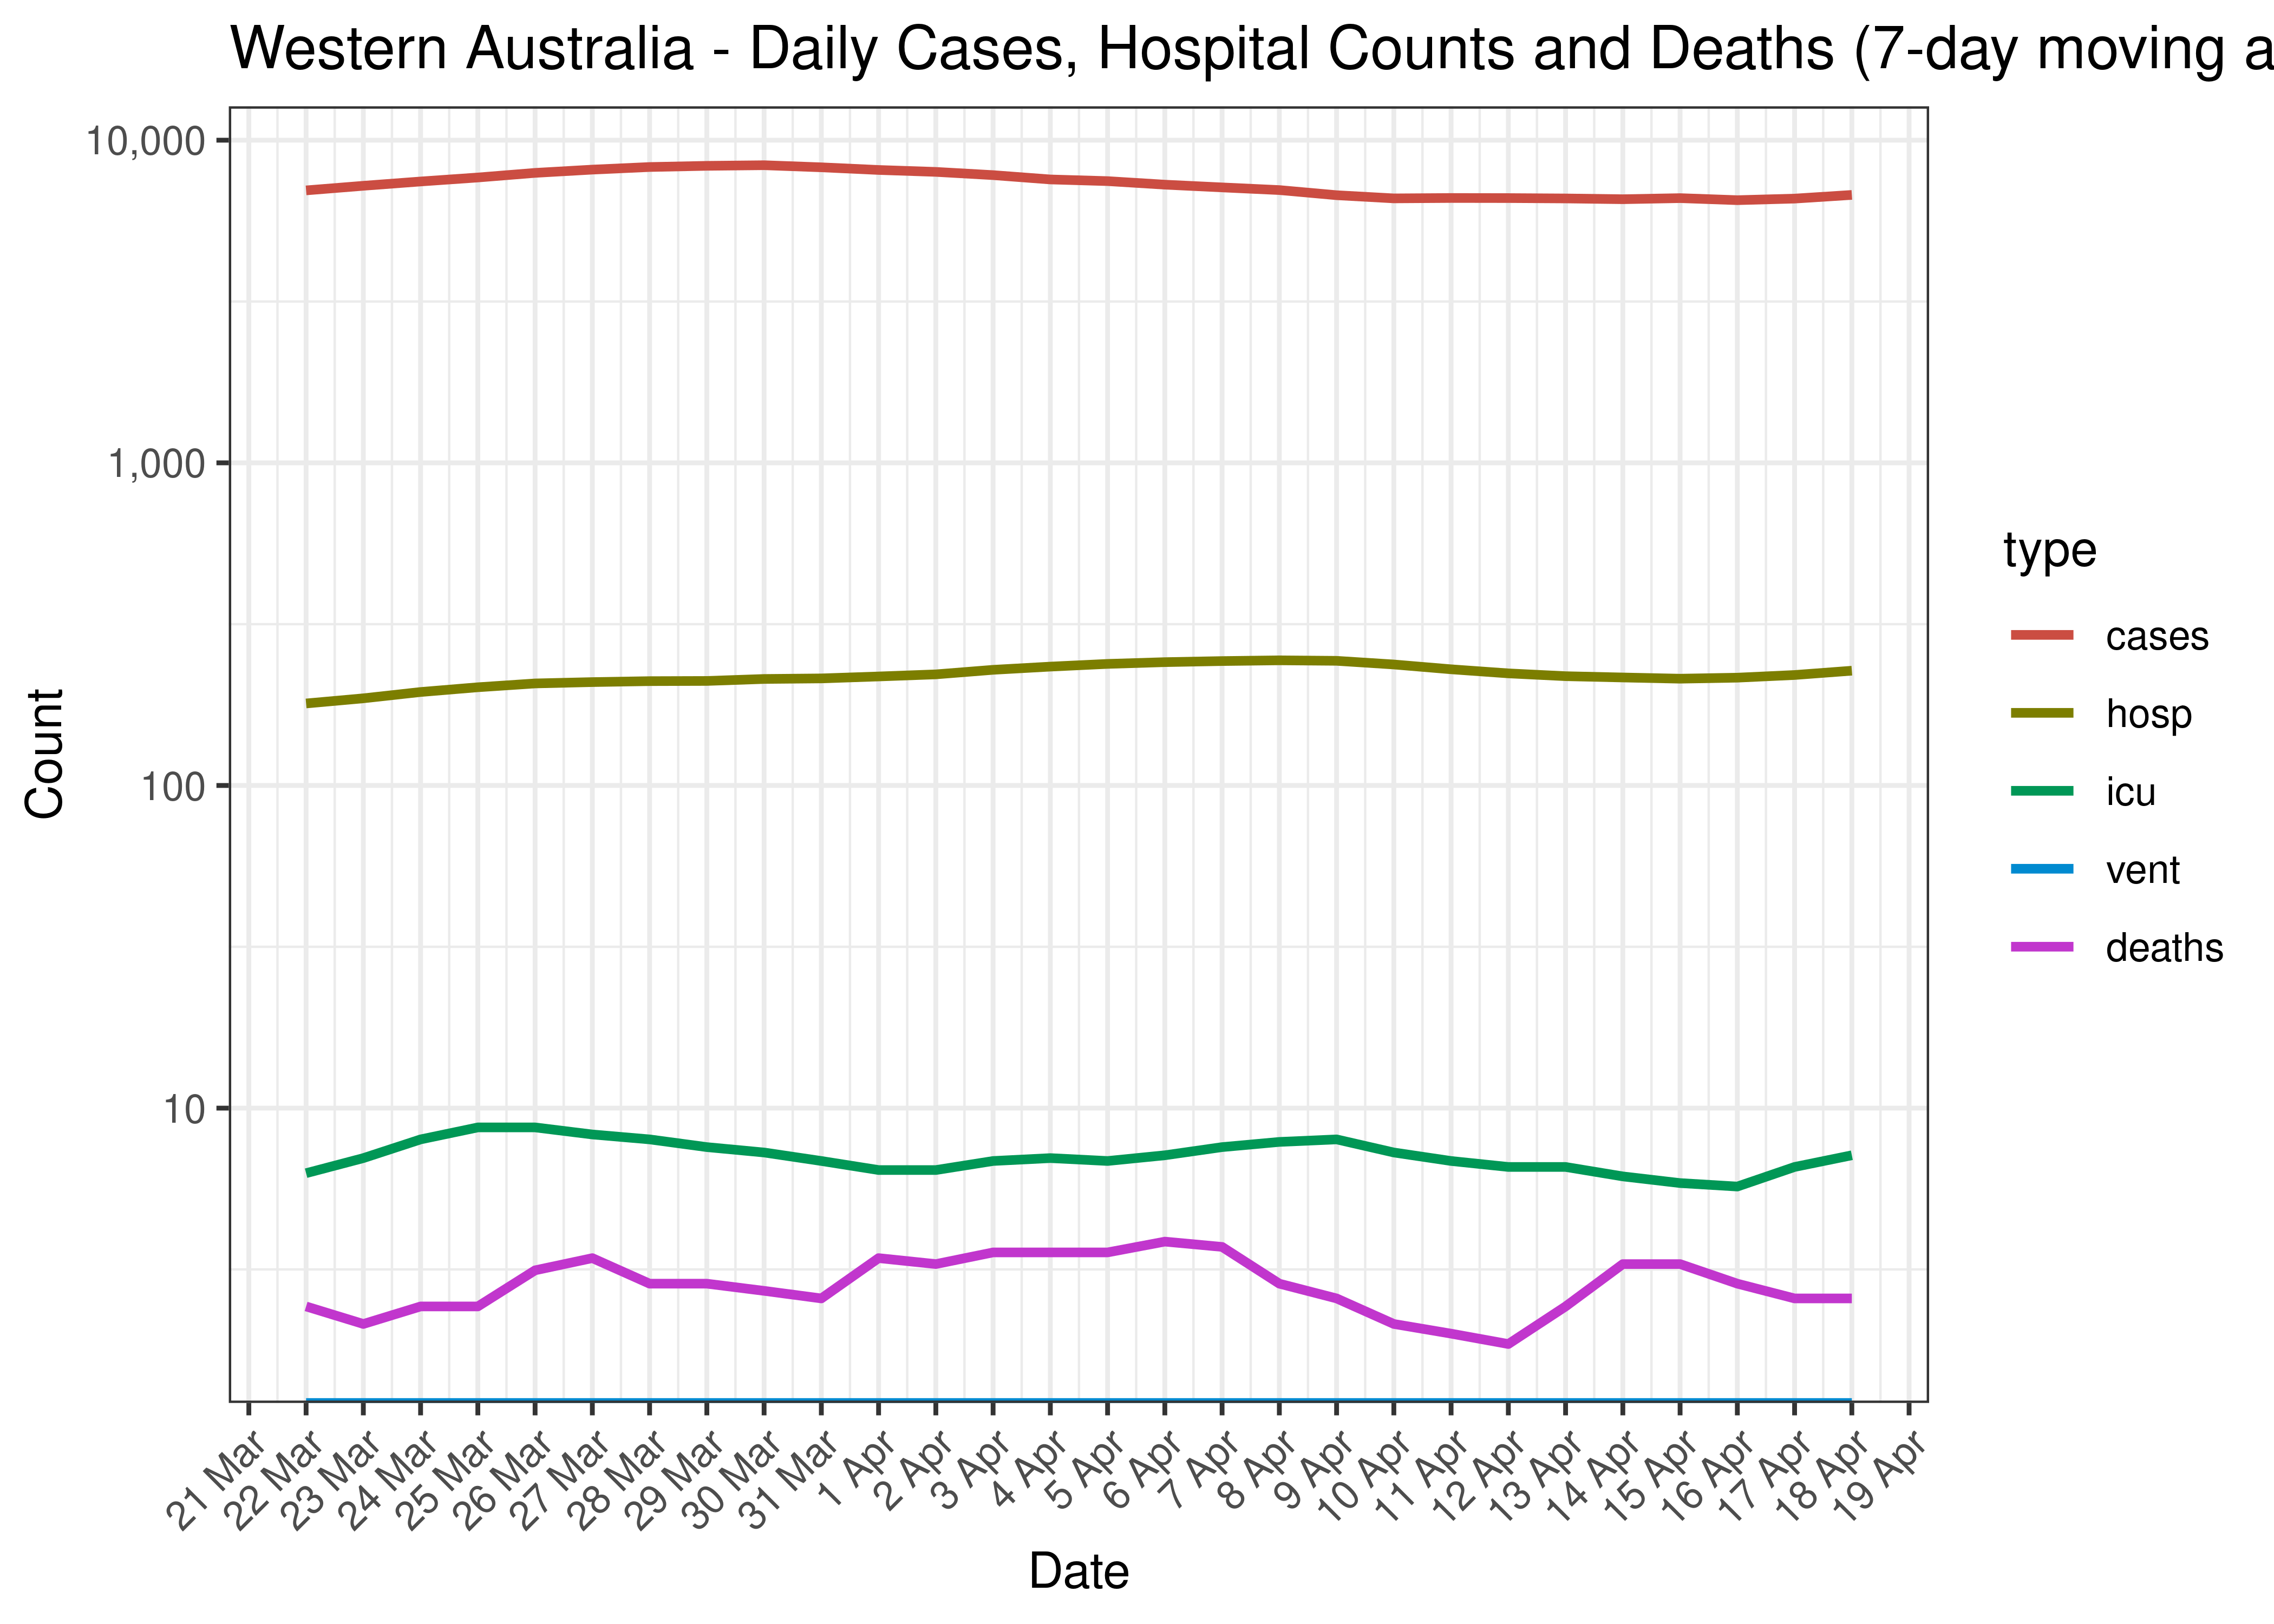 Western Australia - Daily Cases, Admissions and Deaths for Last 30-days (7-day moving average)